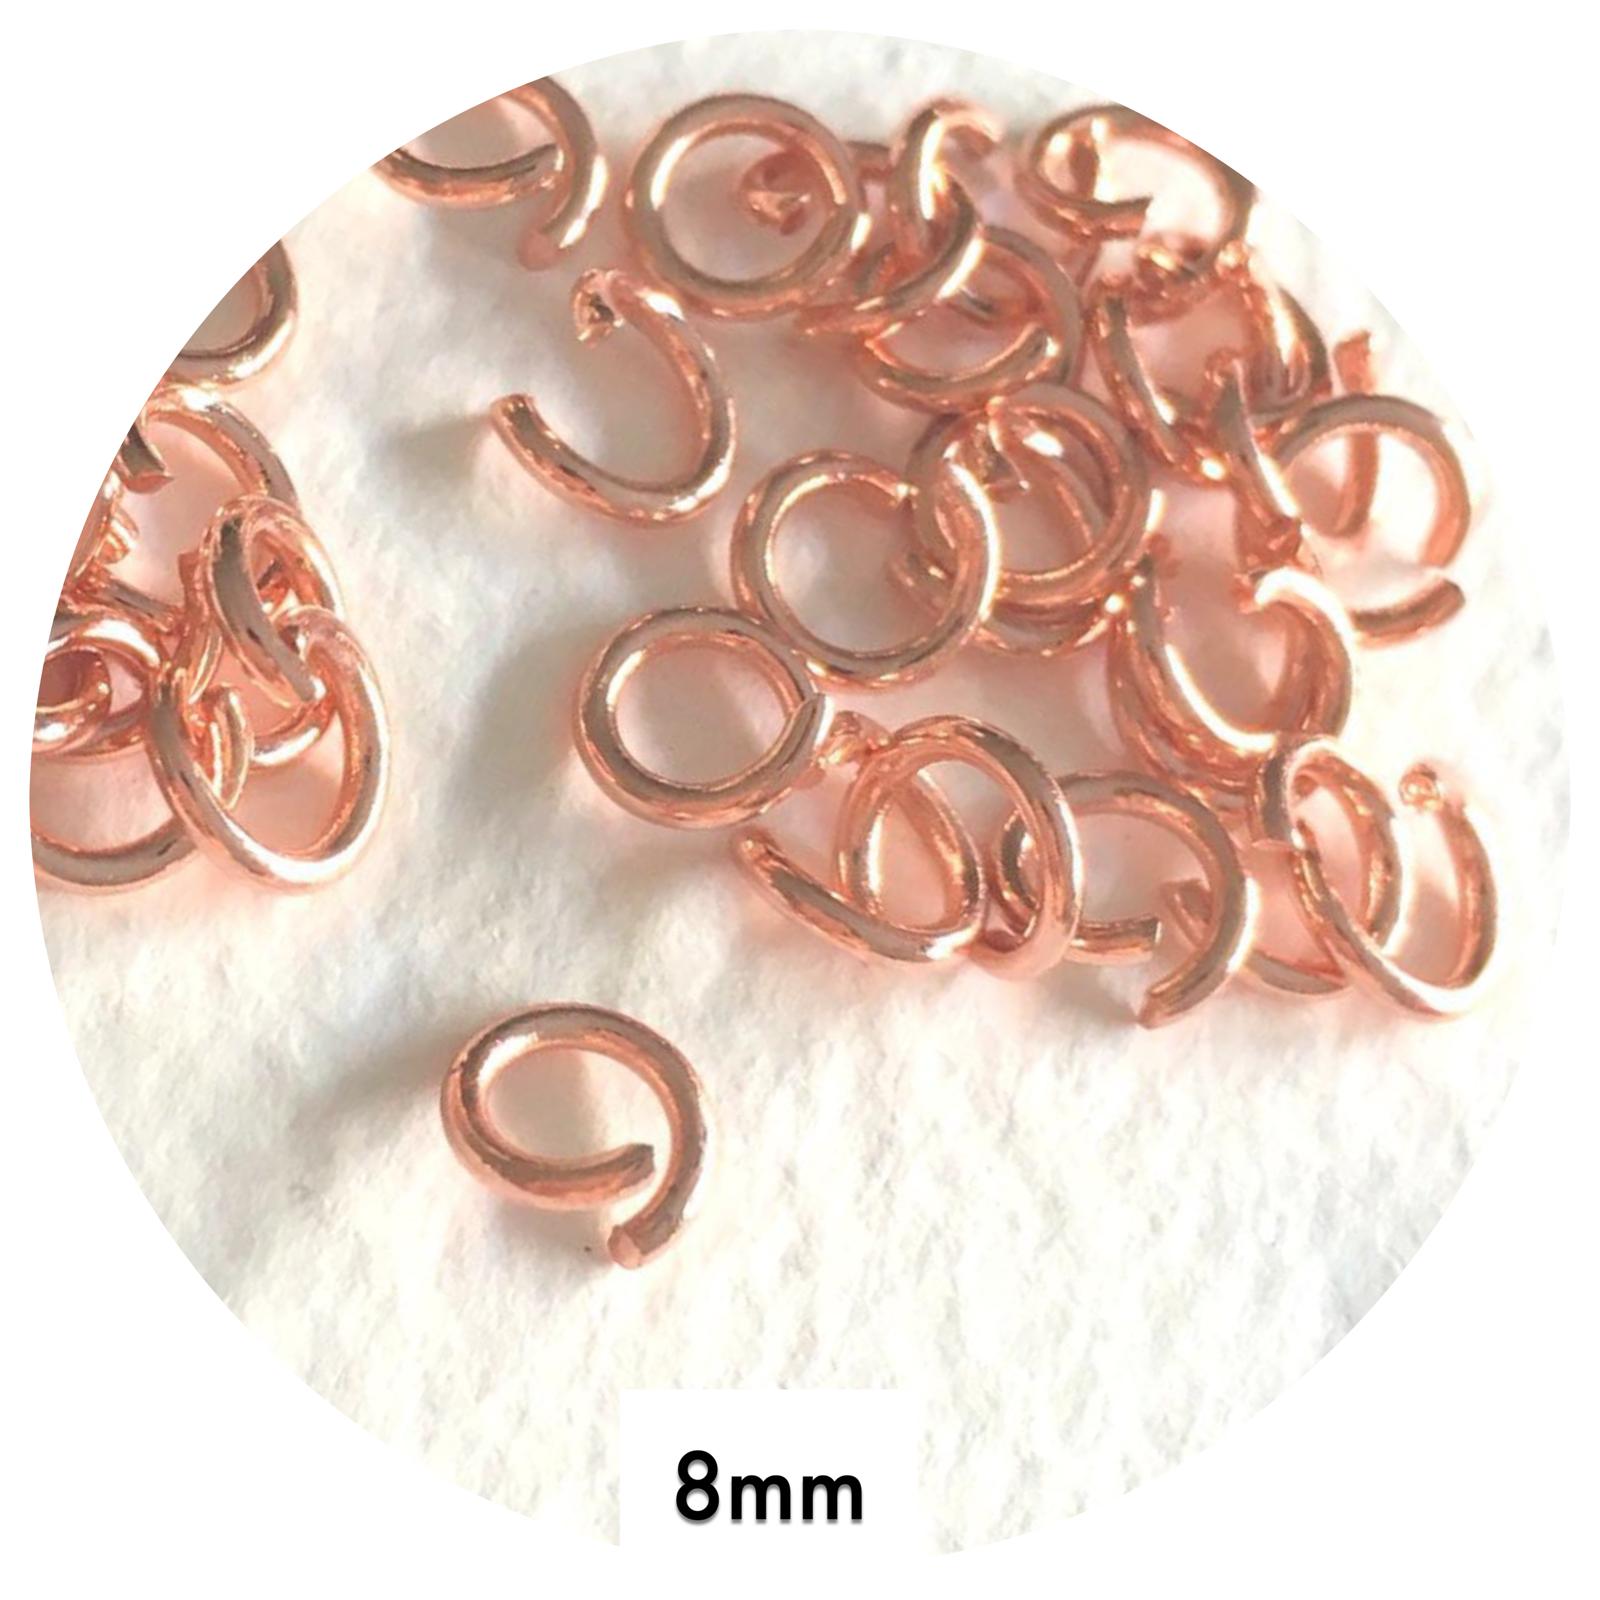 8mm Jump Rings - Rose Gold Stainless Steel - 40 pcs